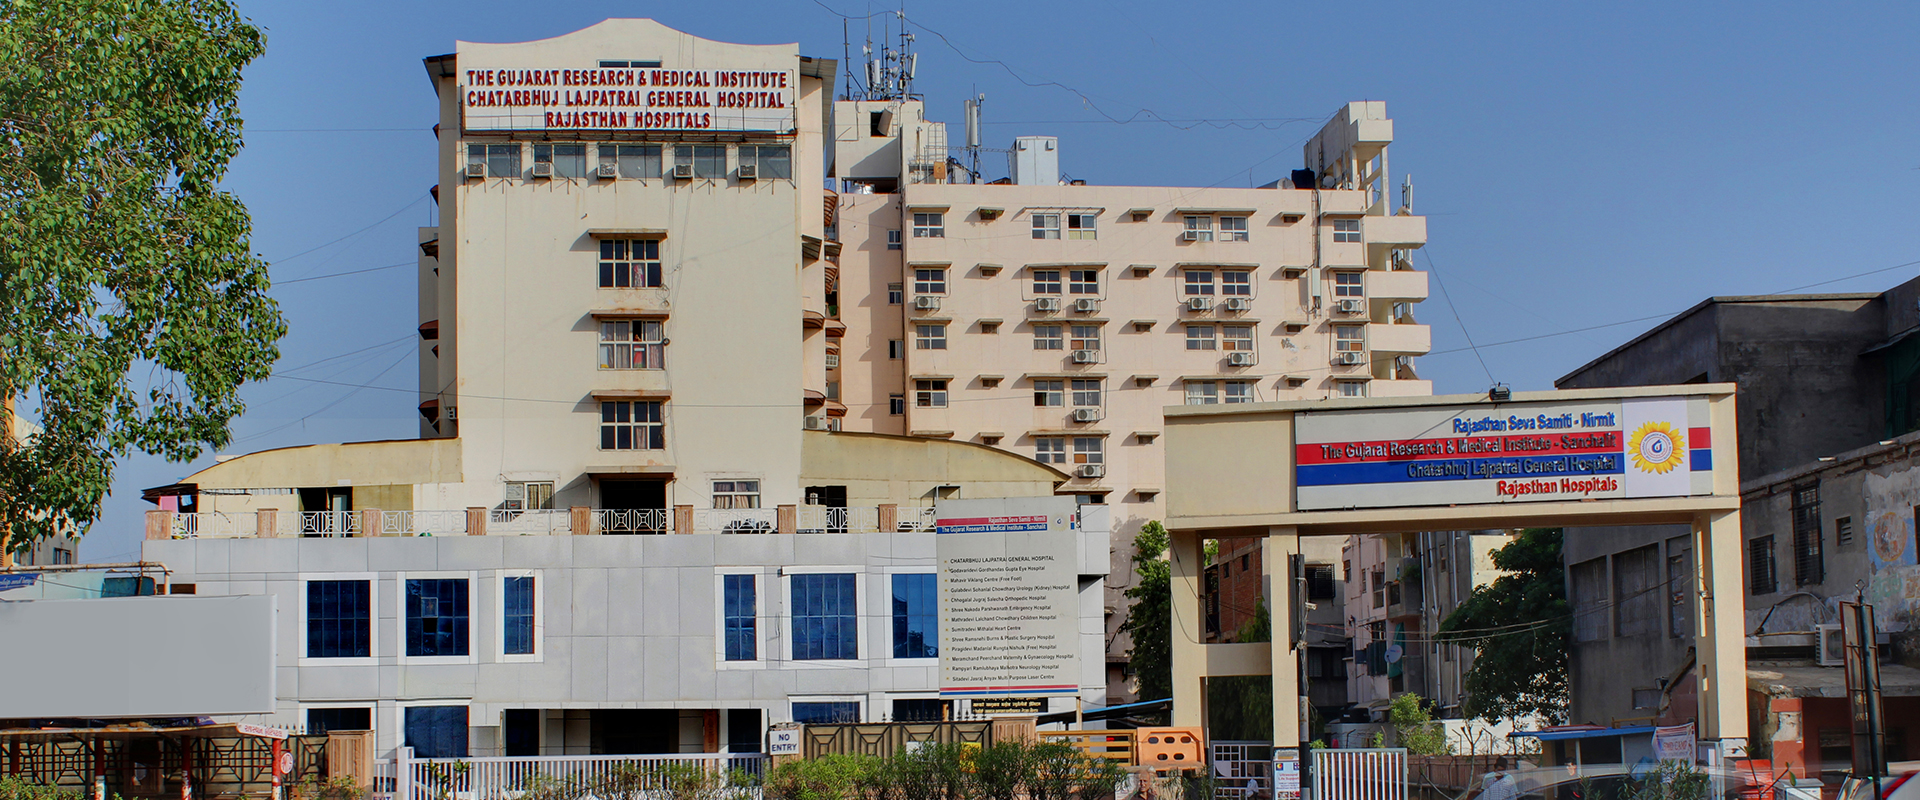 The Gujarat Research And Medical Institute